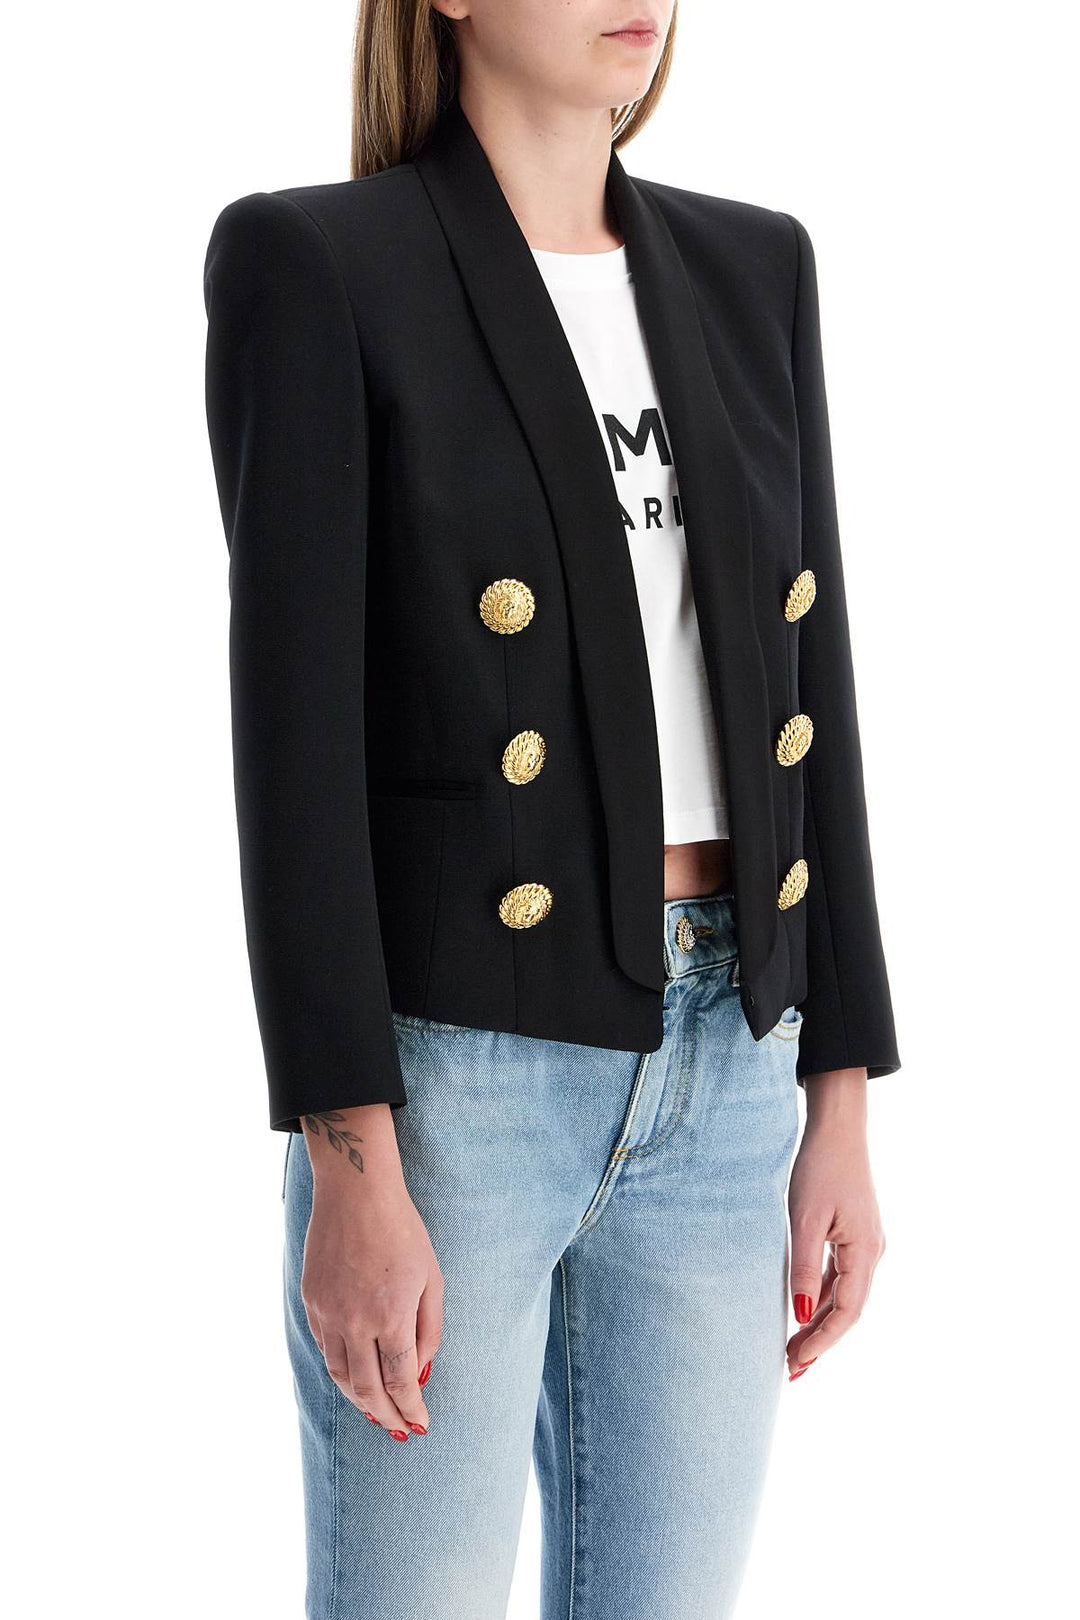 Balmain Replace With Double Quote6 Button Spencer Jacketreplace With Double Quote   Black